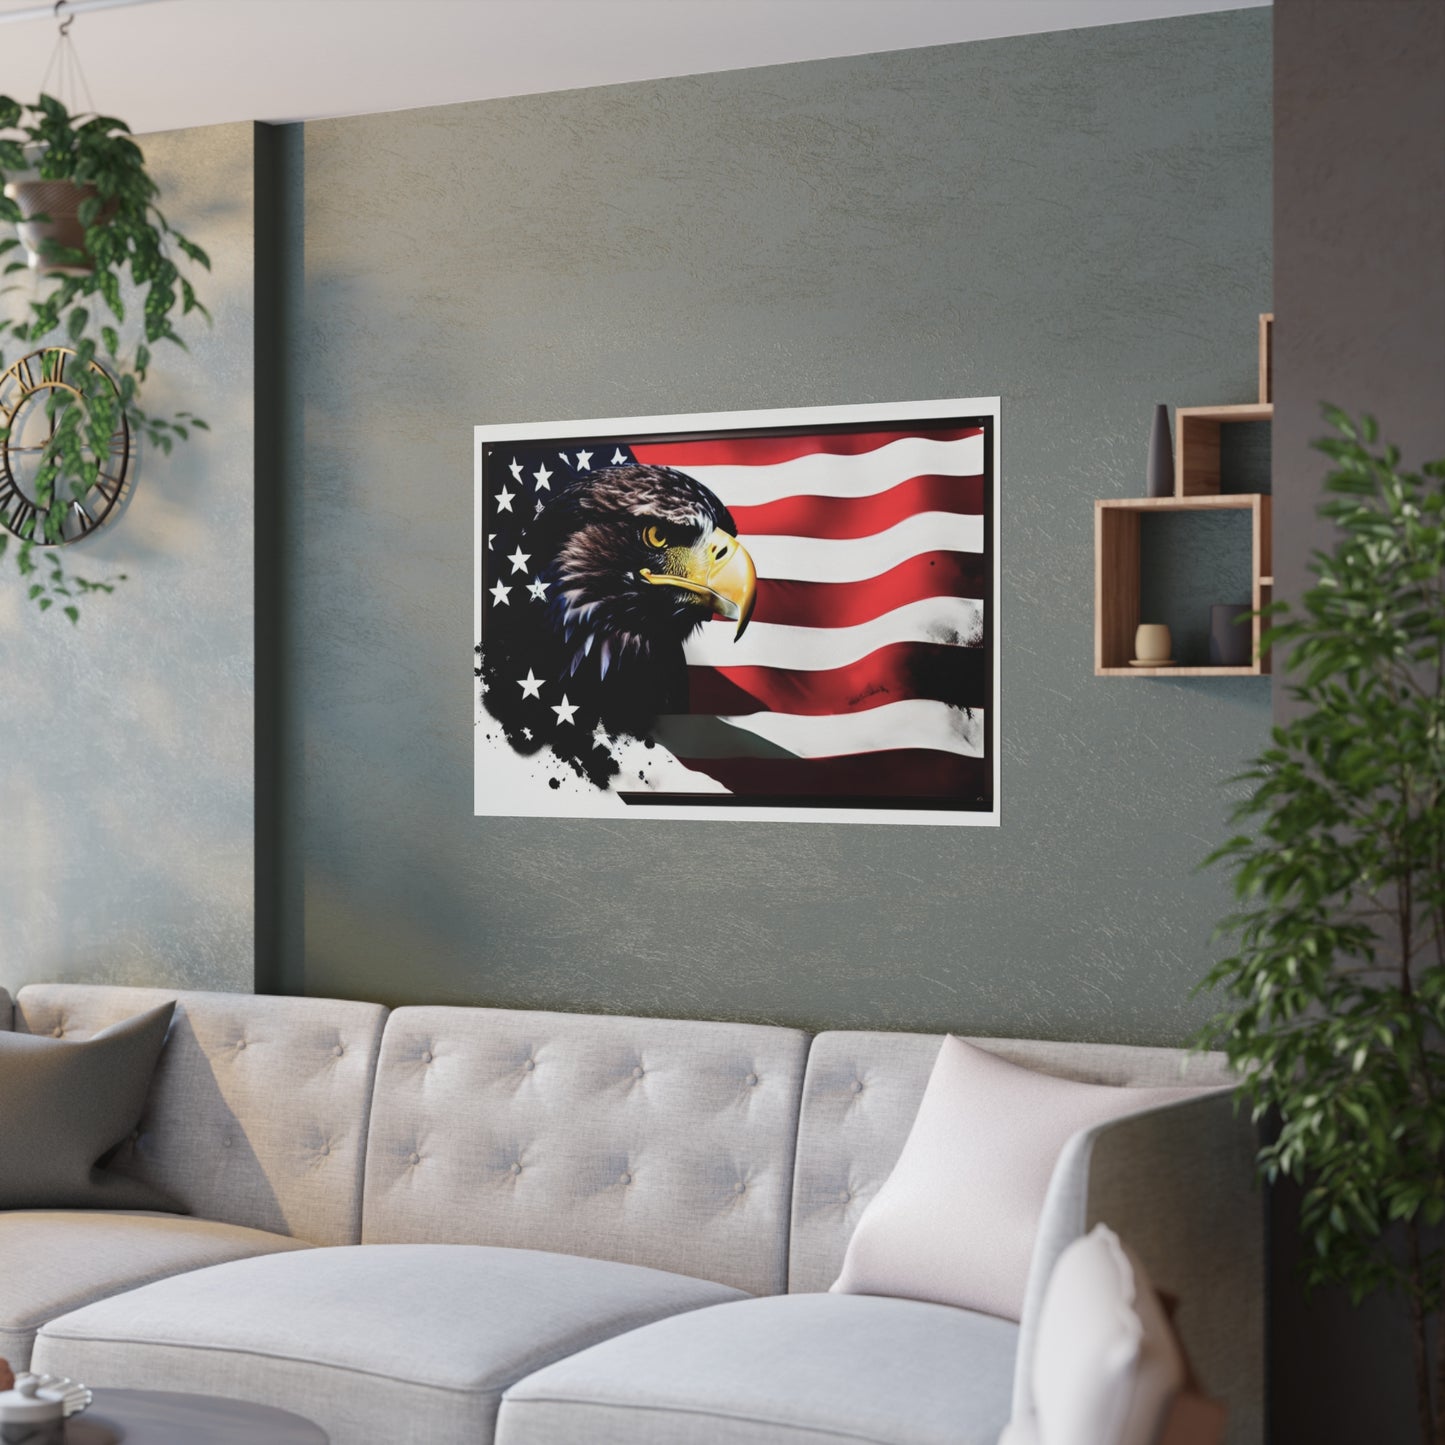 Eagle and flag Satin Posters (210gsm)